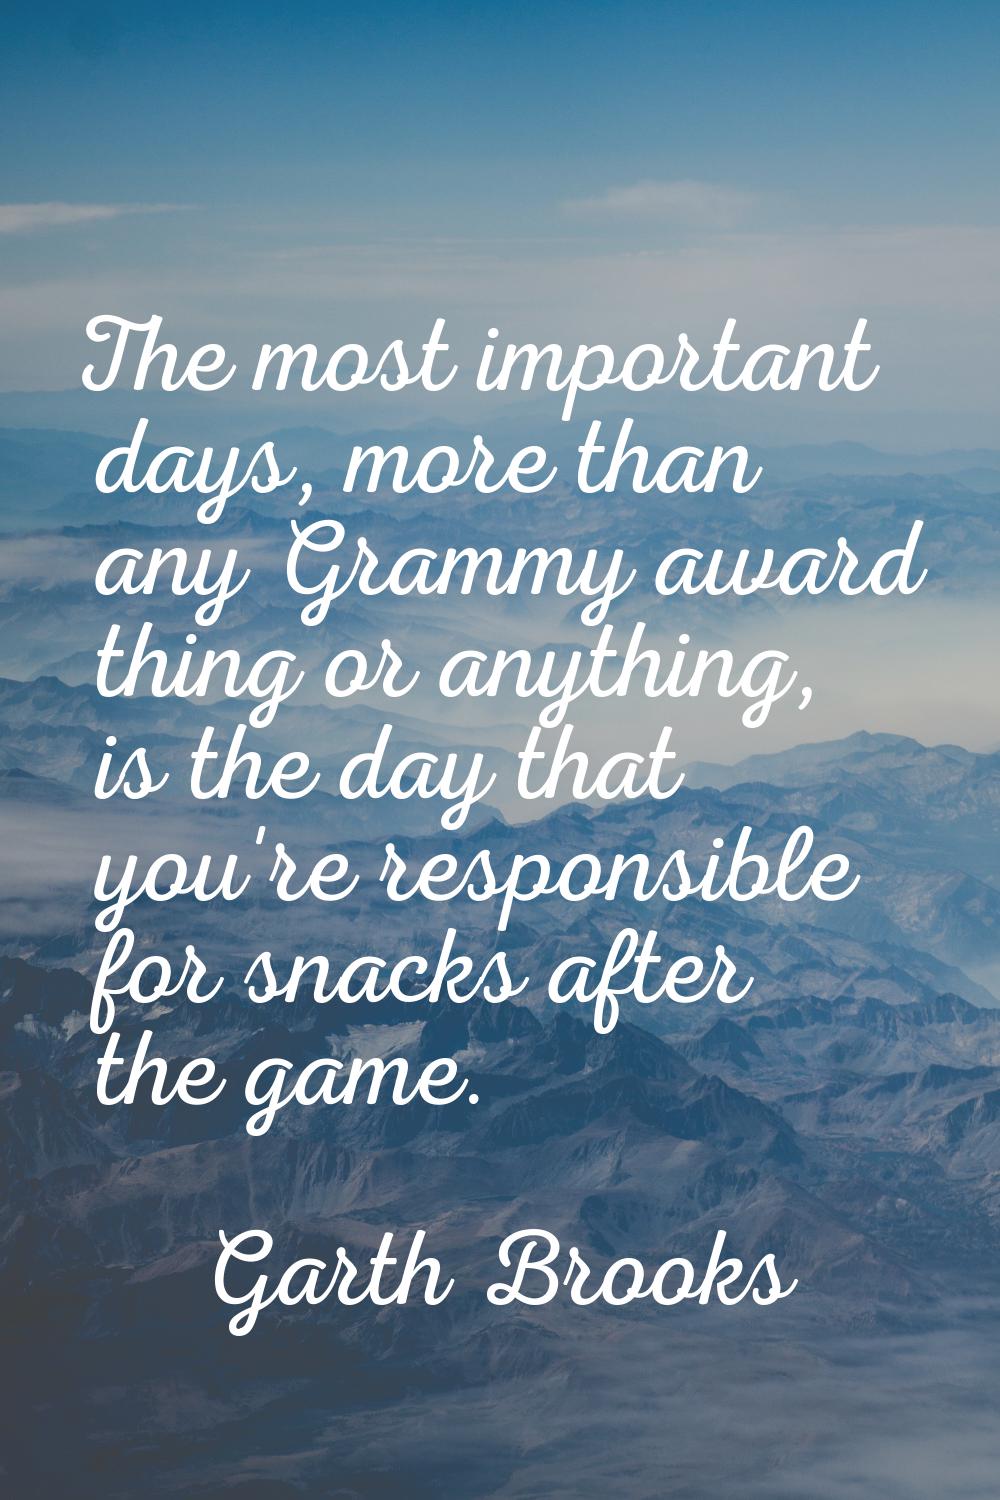 The most important days, more than any Grammy award thing or anything, is the day that you're respo